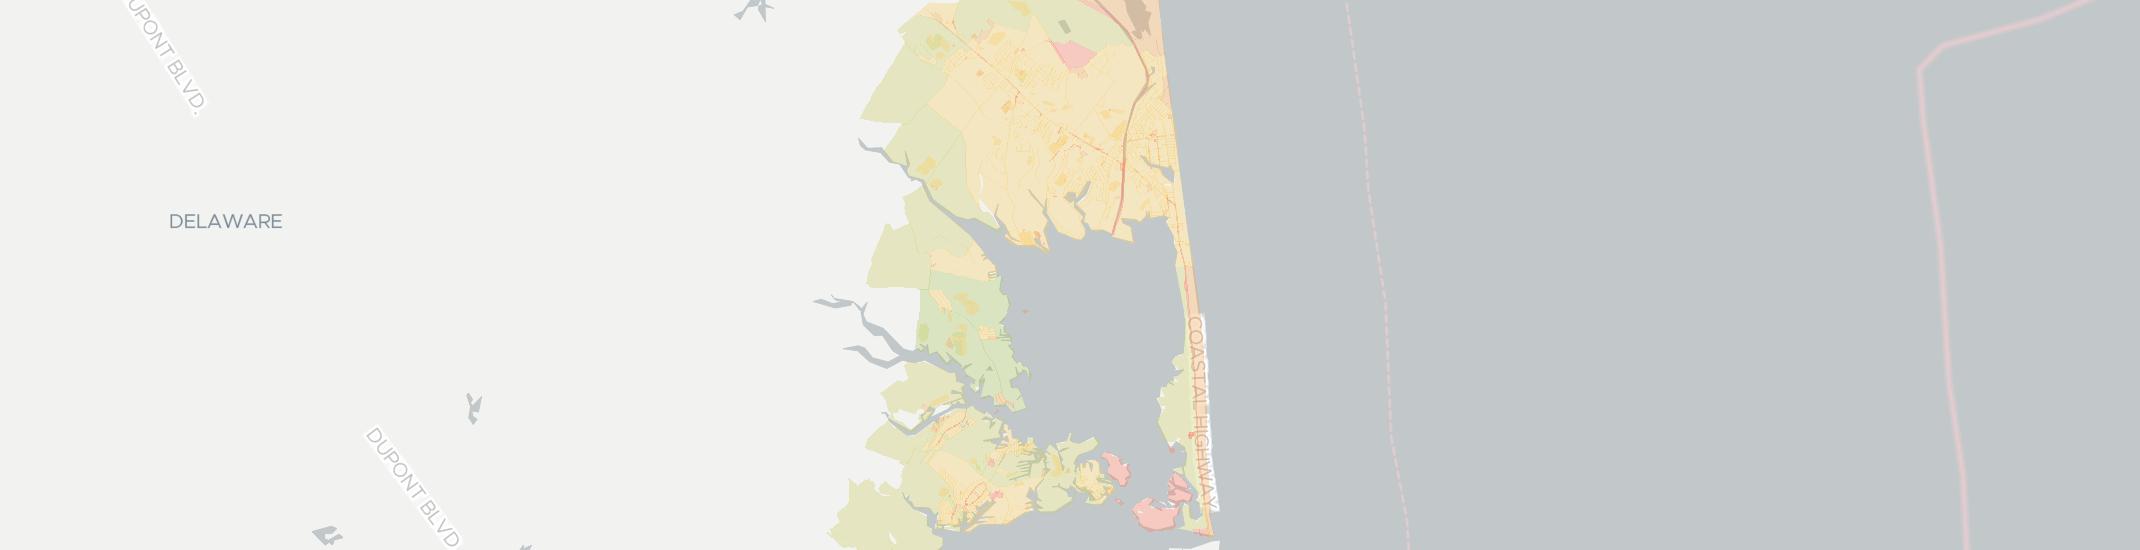 Rehoboth Beach Internet Competition Map. Click for interactive map.